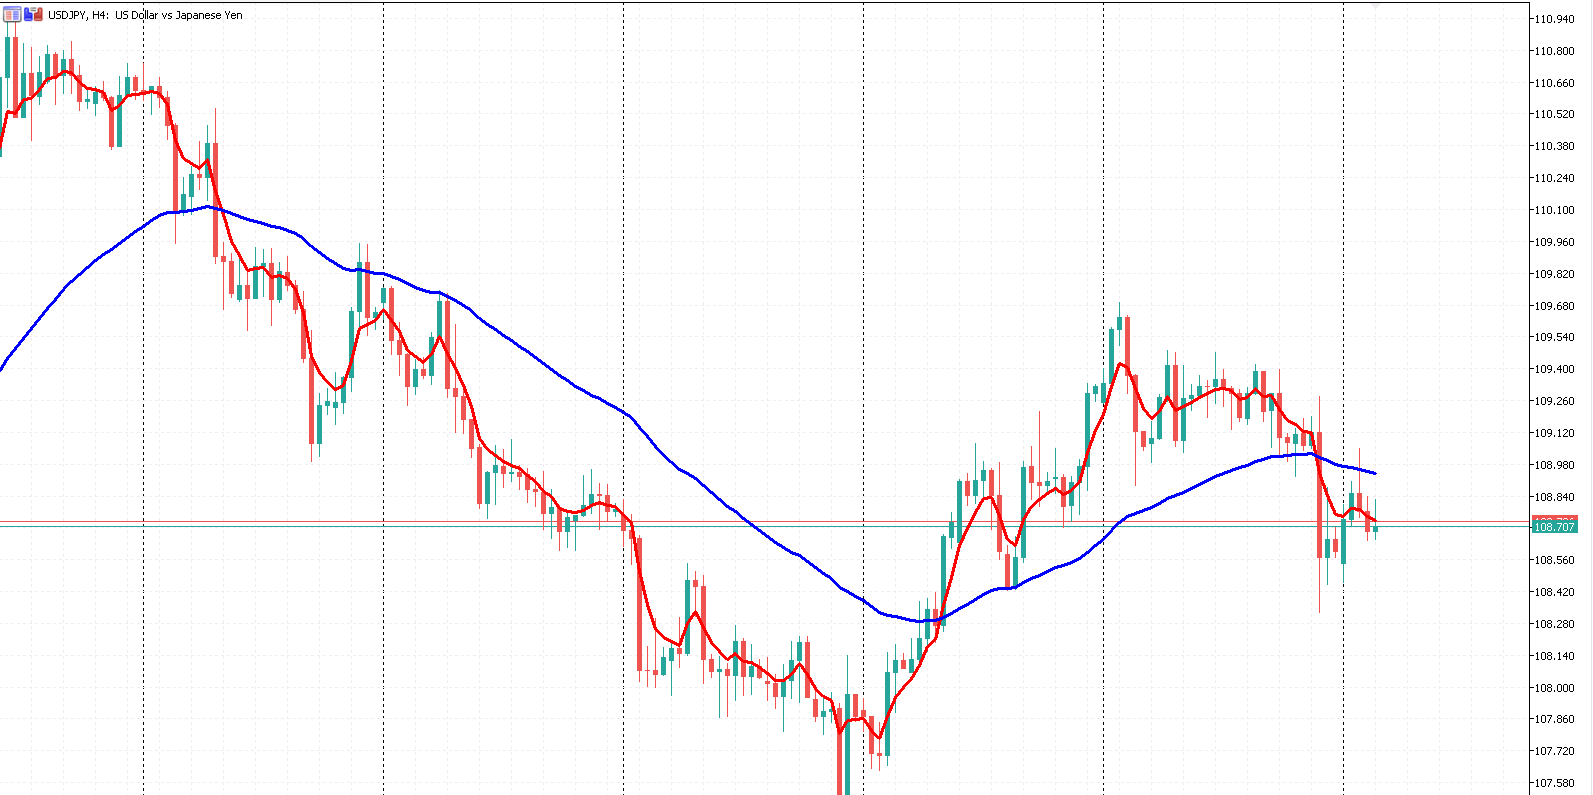 Moving average on the chart